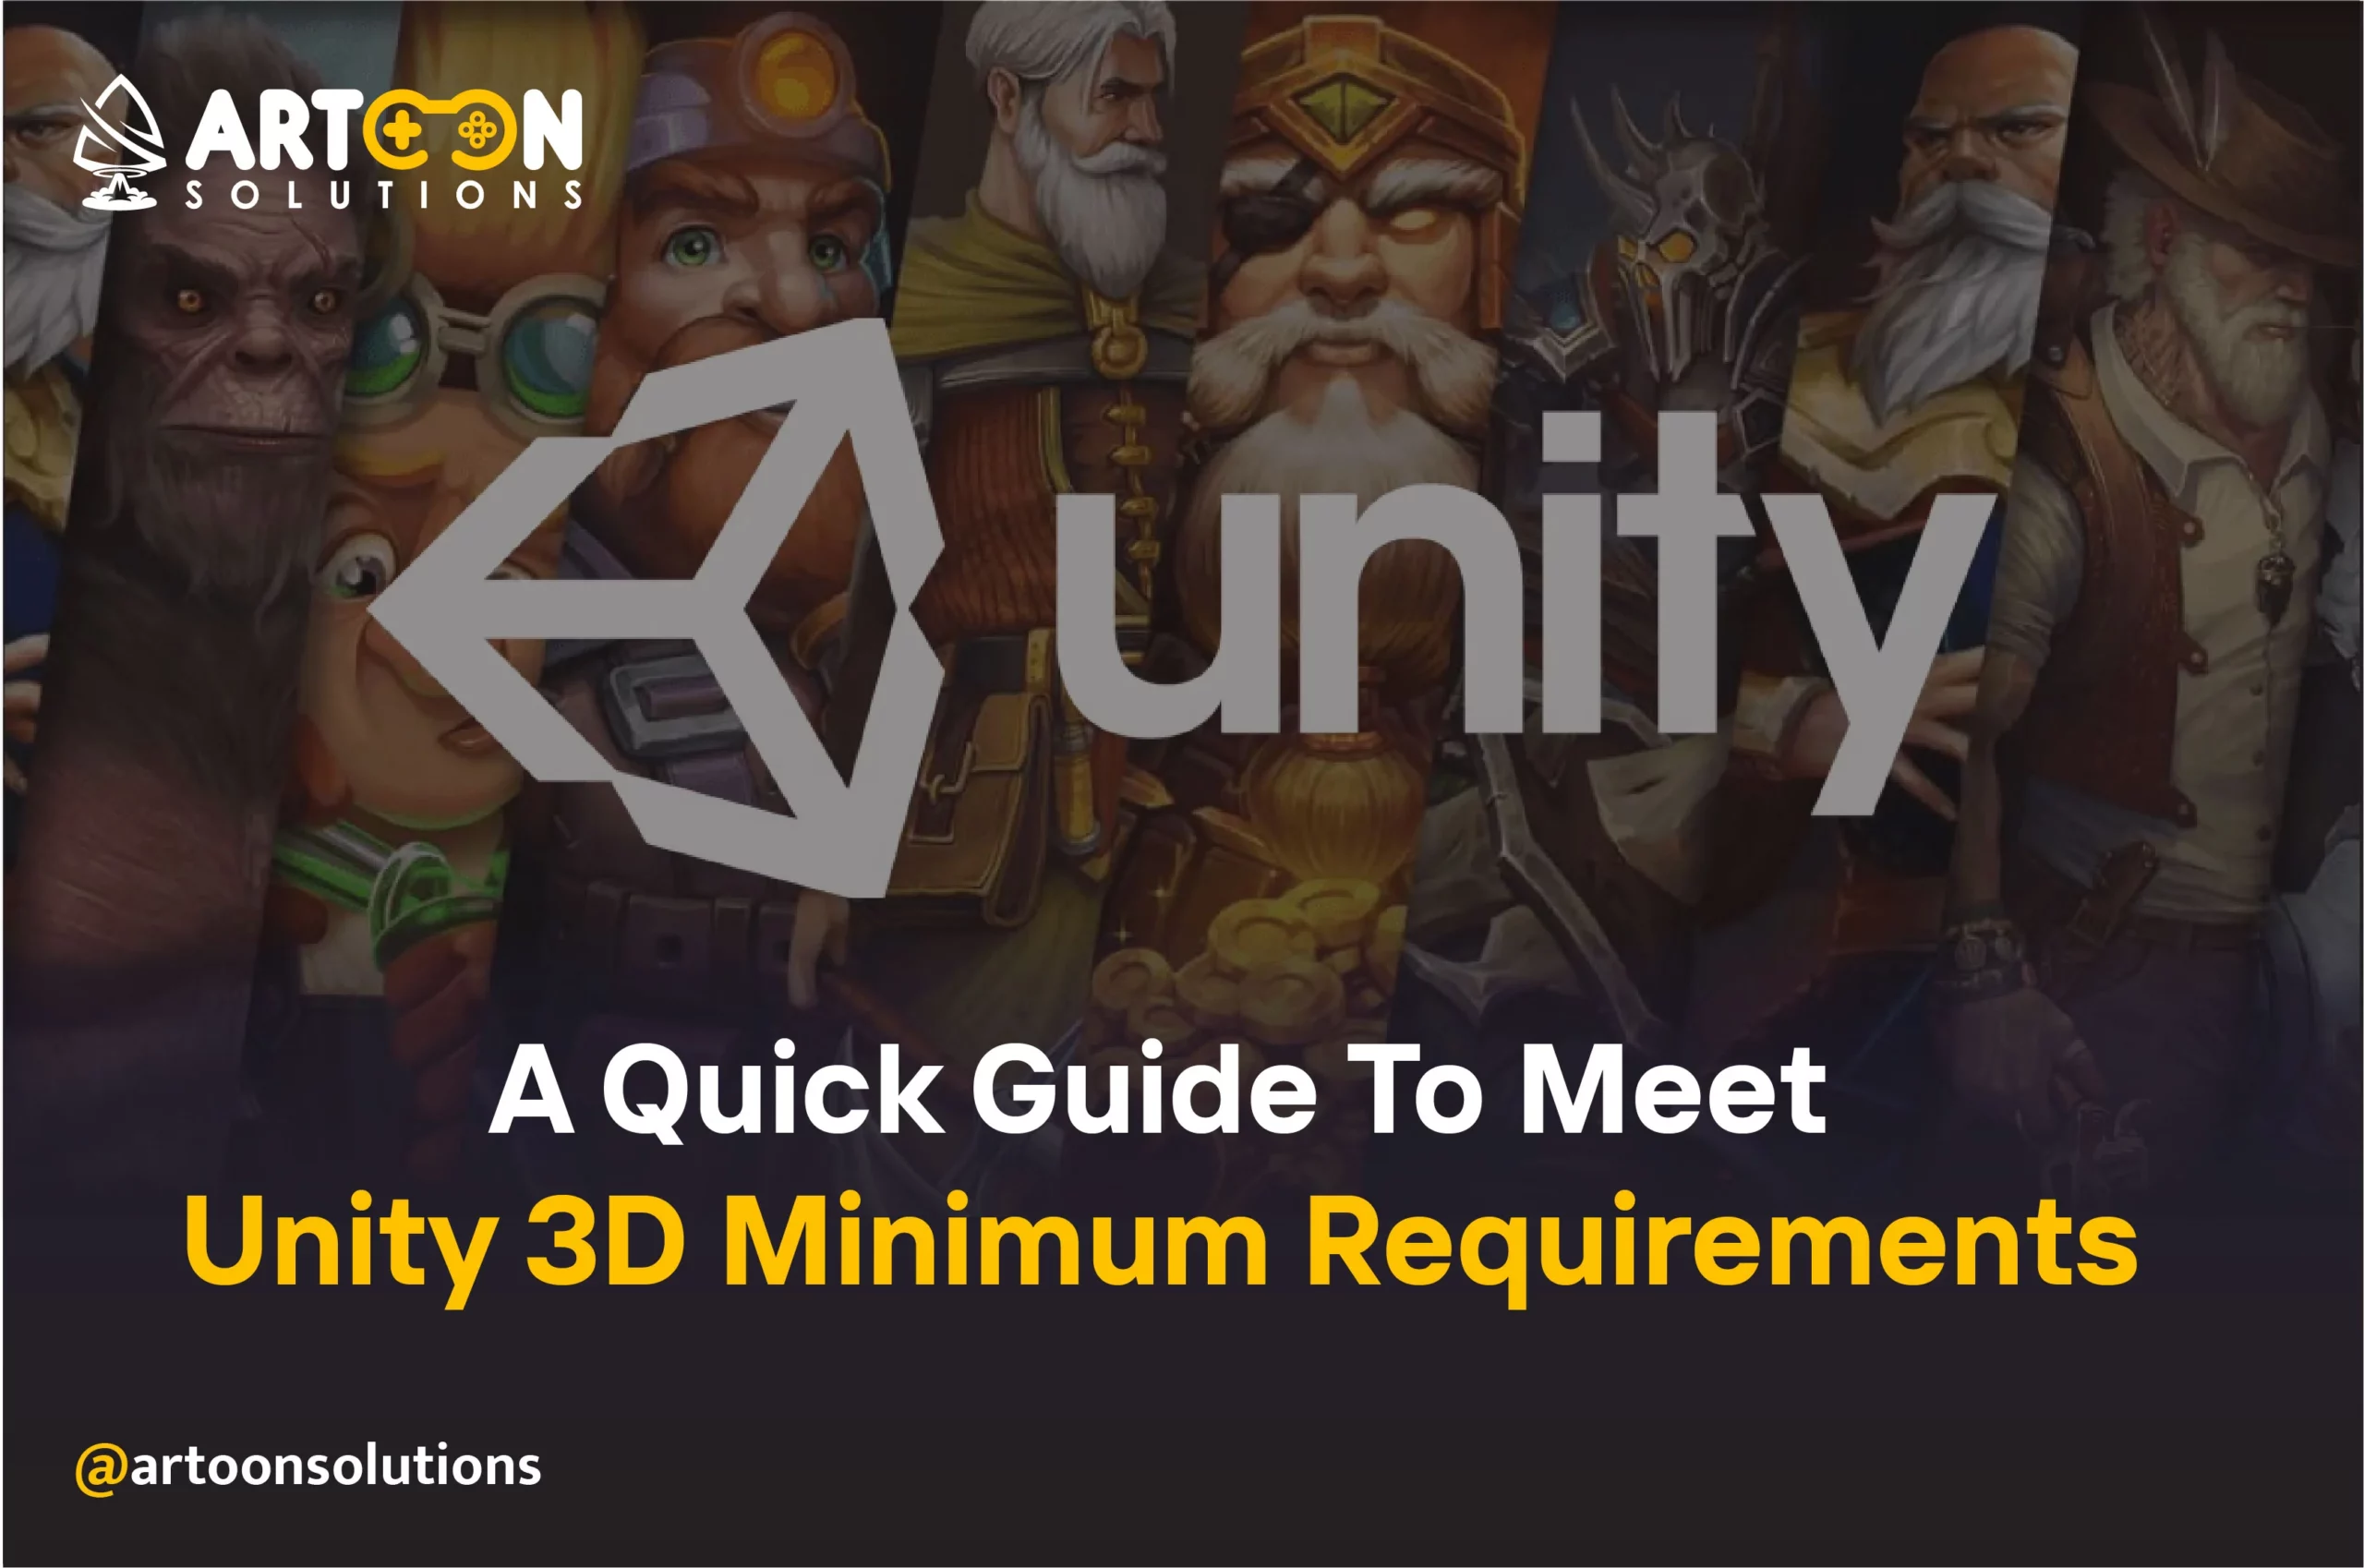 A Quick Guide To Meet Unity 3D Minimum Requirements